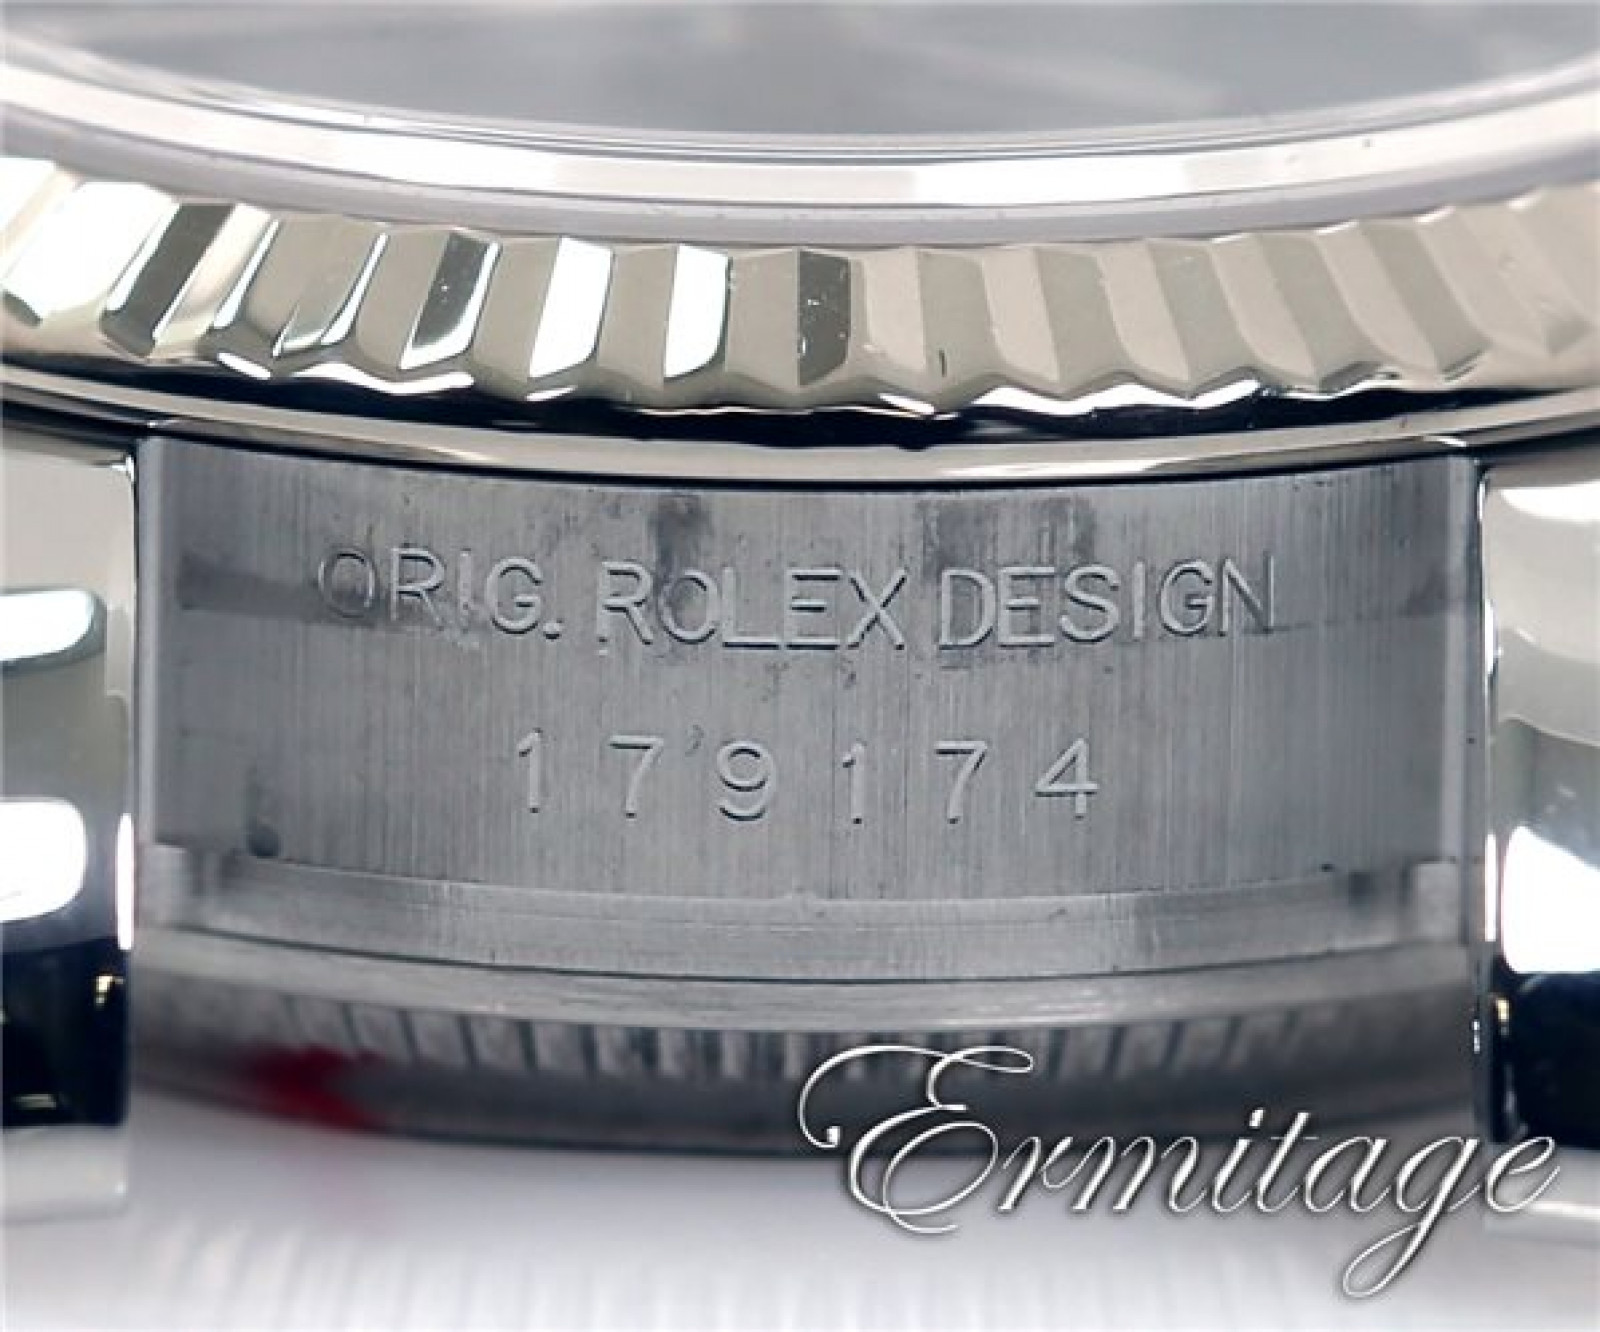 Rolex Datejust 179174 Steel with Black Dial & Roman Markers